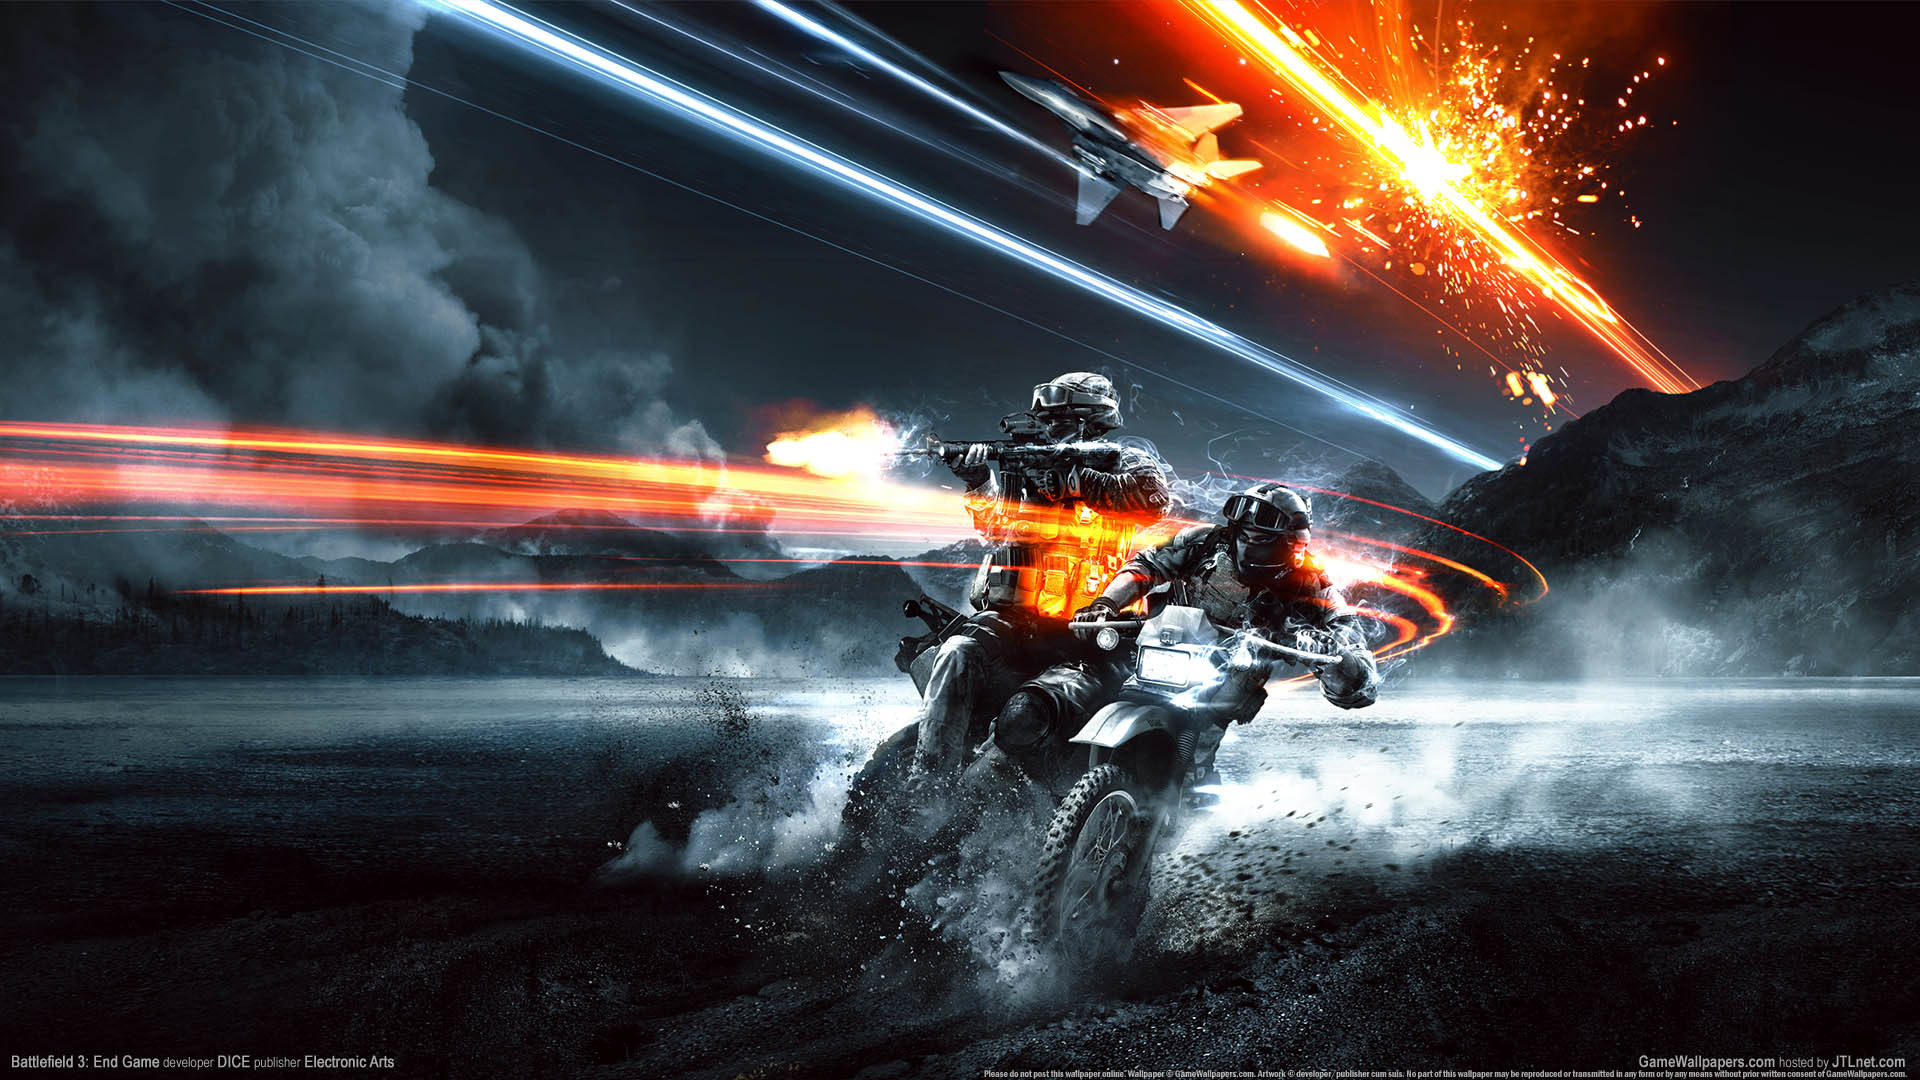 1920x1080 ... Battlefield 3: End Game wallpaper or background 01